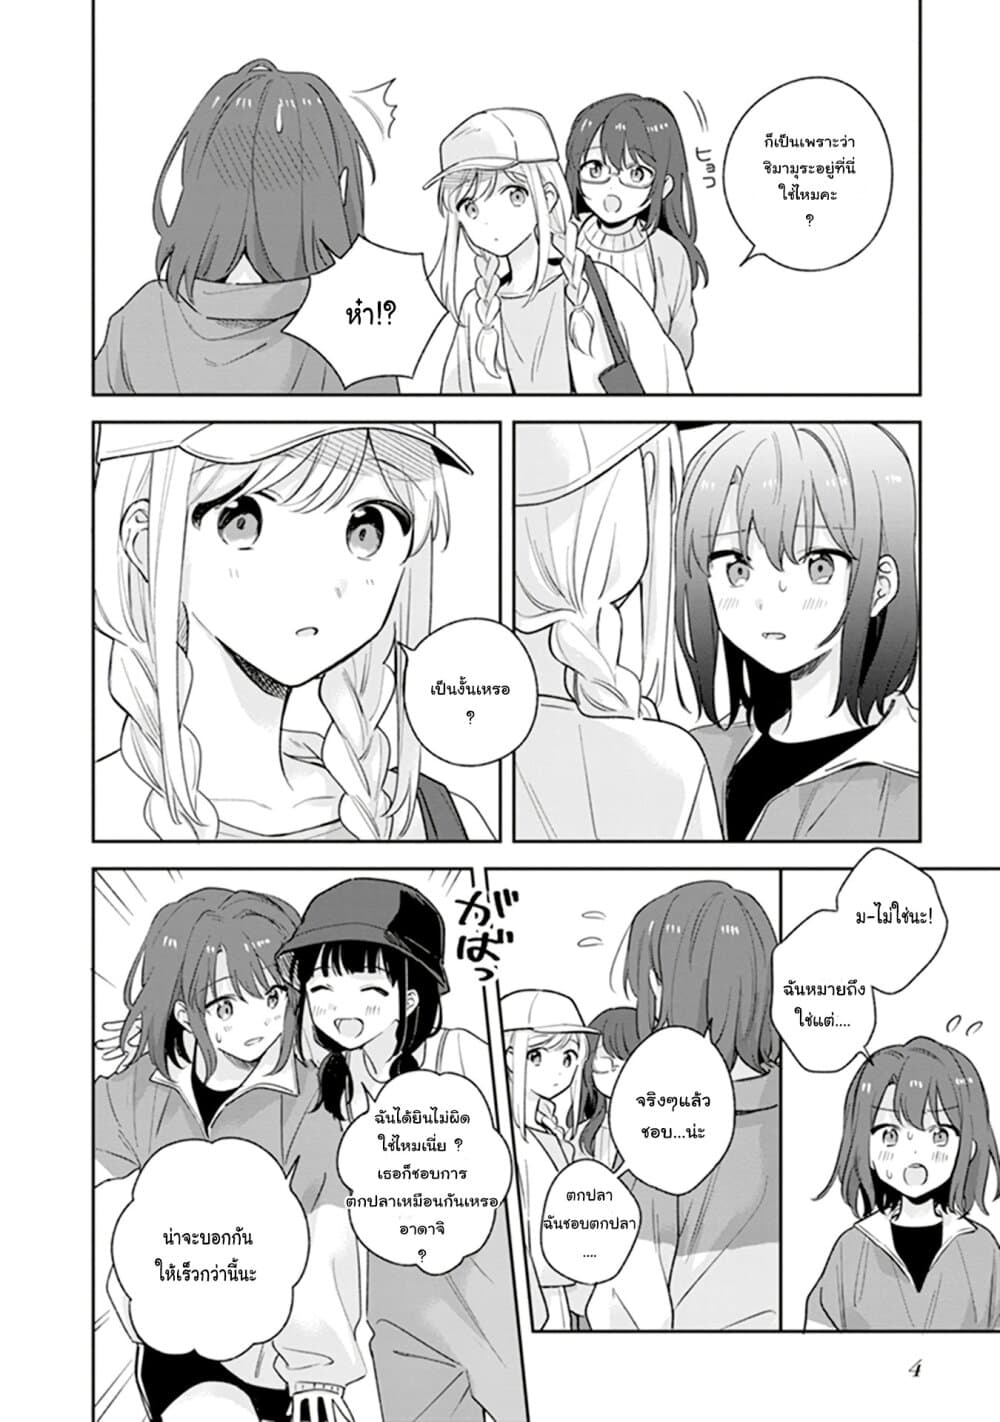 Adachi-to-Shimamura-Official-Comic-Anthology-Chapter1-6.jpg